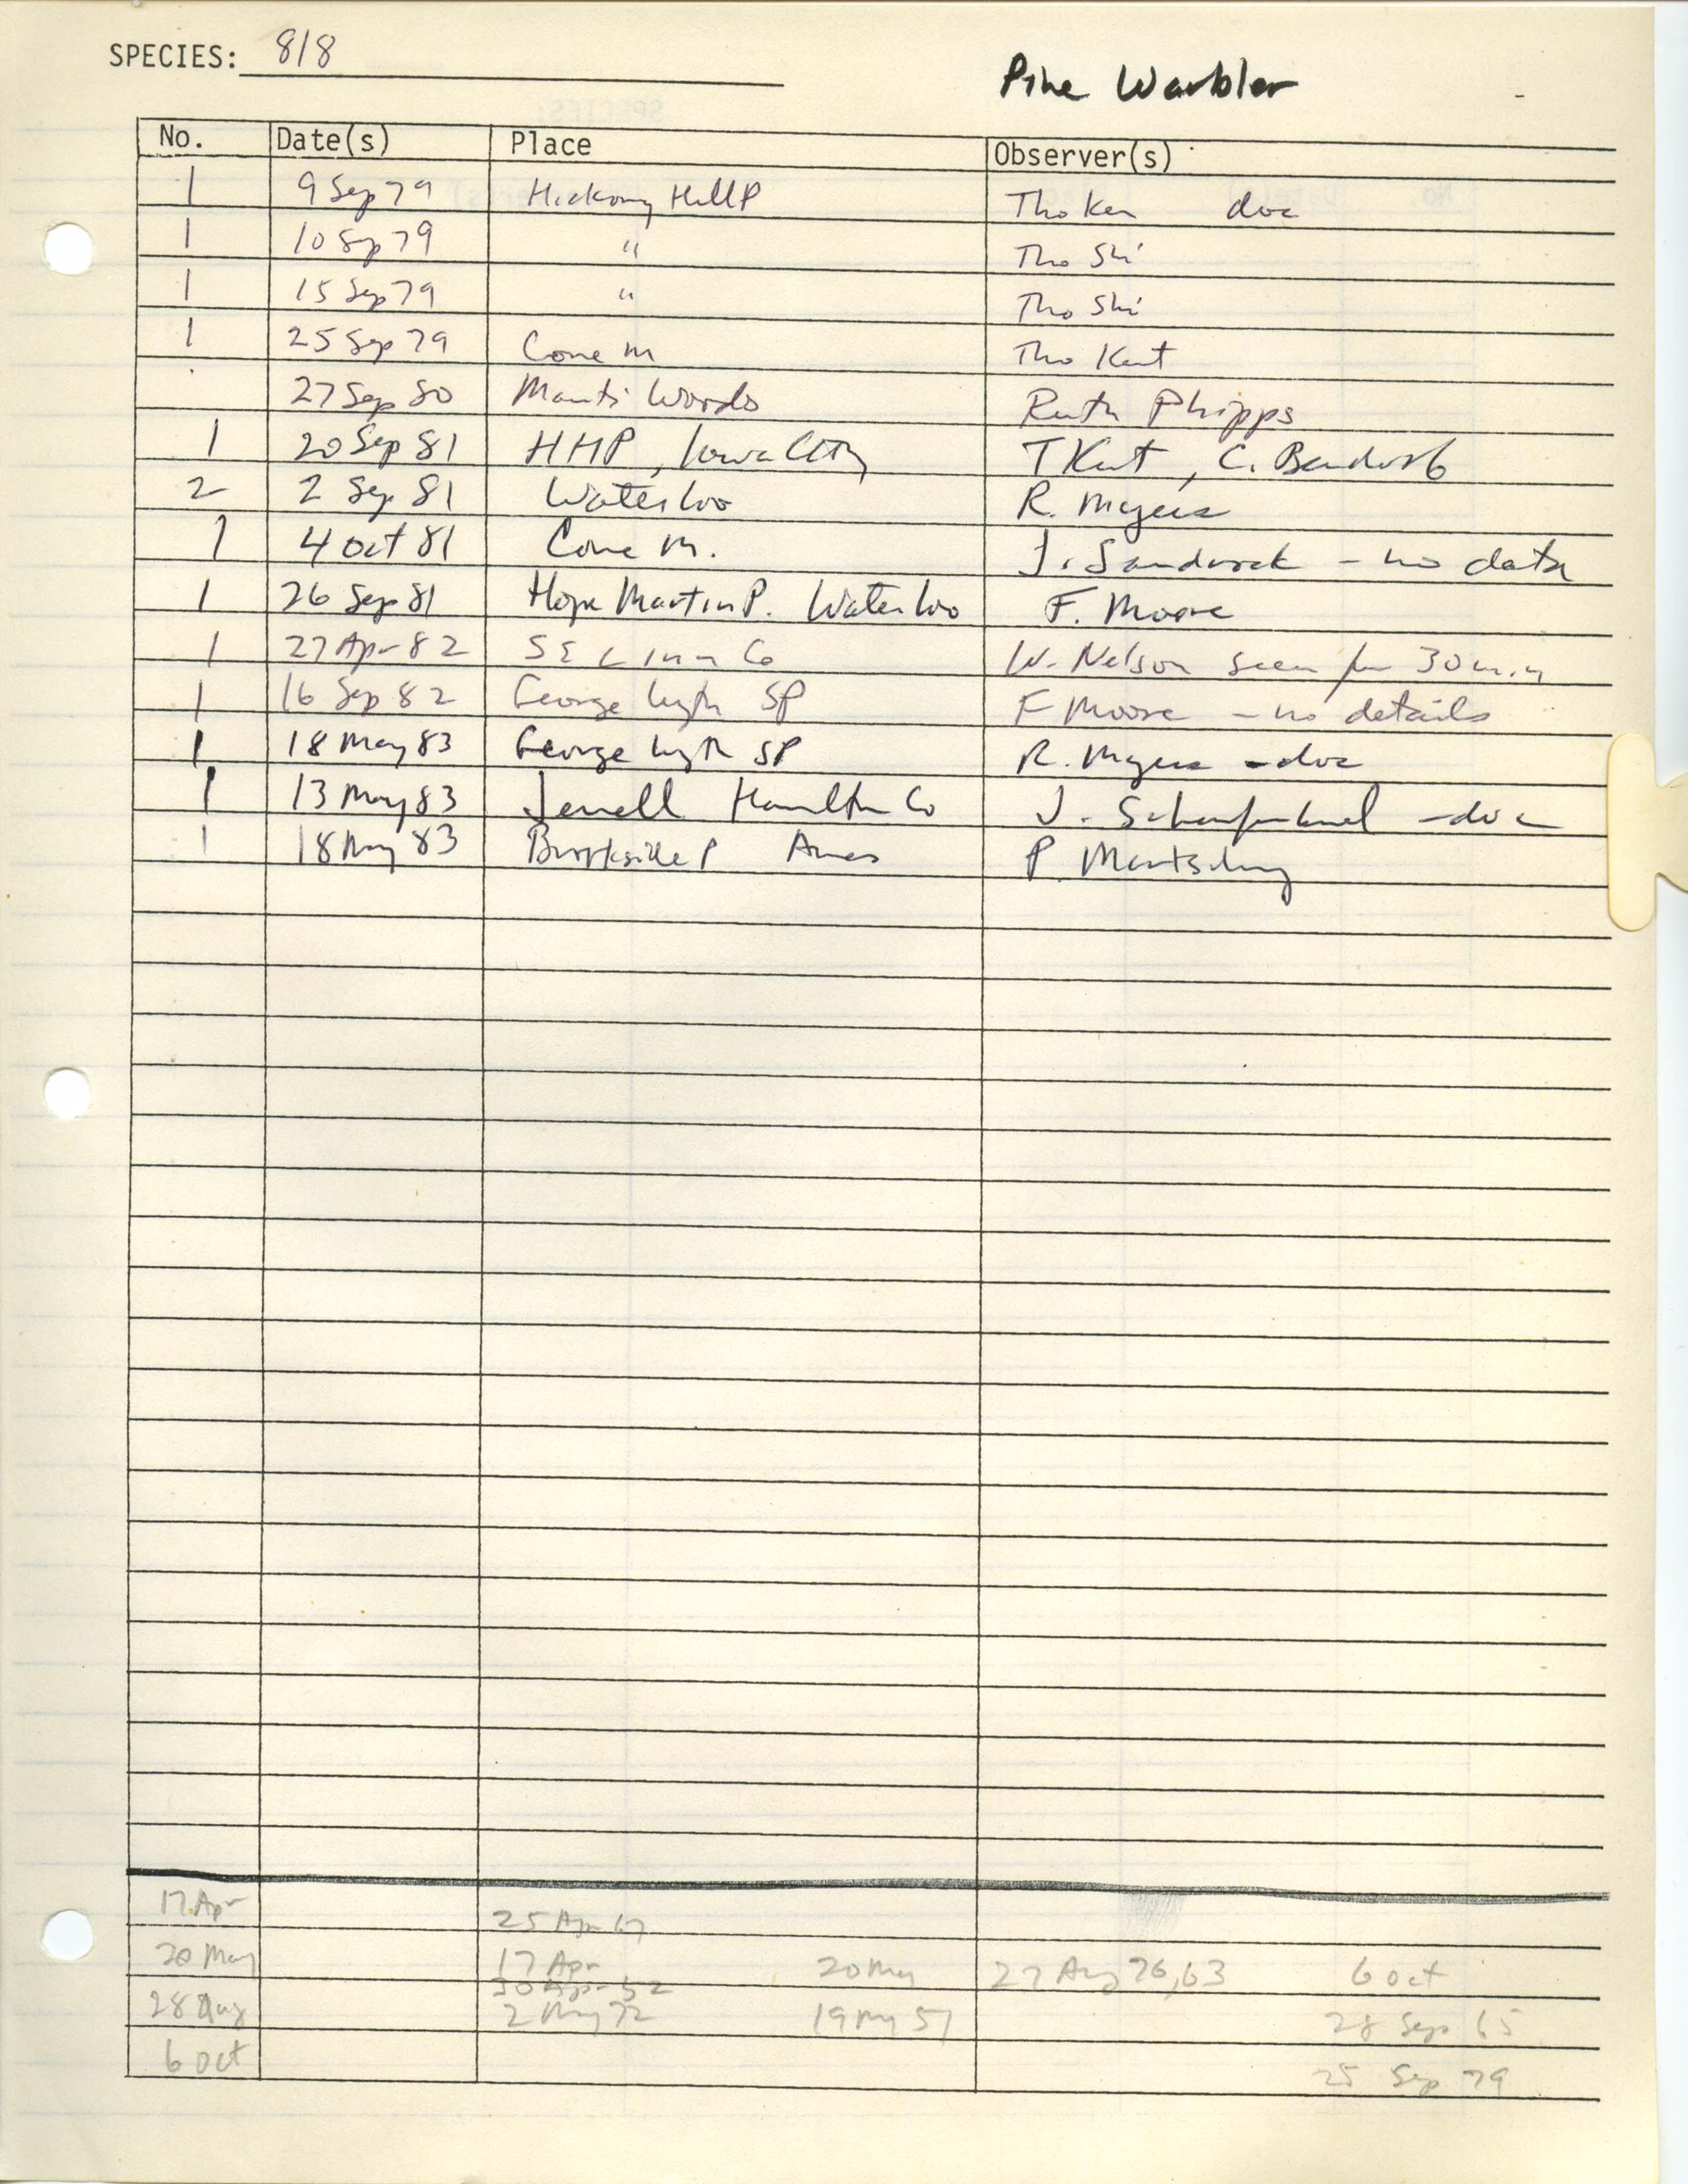 Iowa Ornithologists' Union, field report compiled data, Pine Warbler, 1979-1983